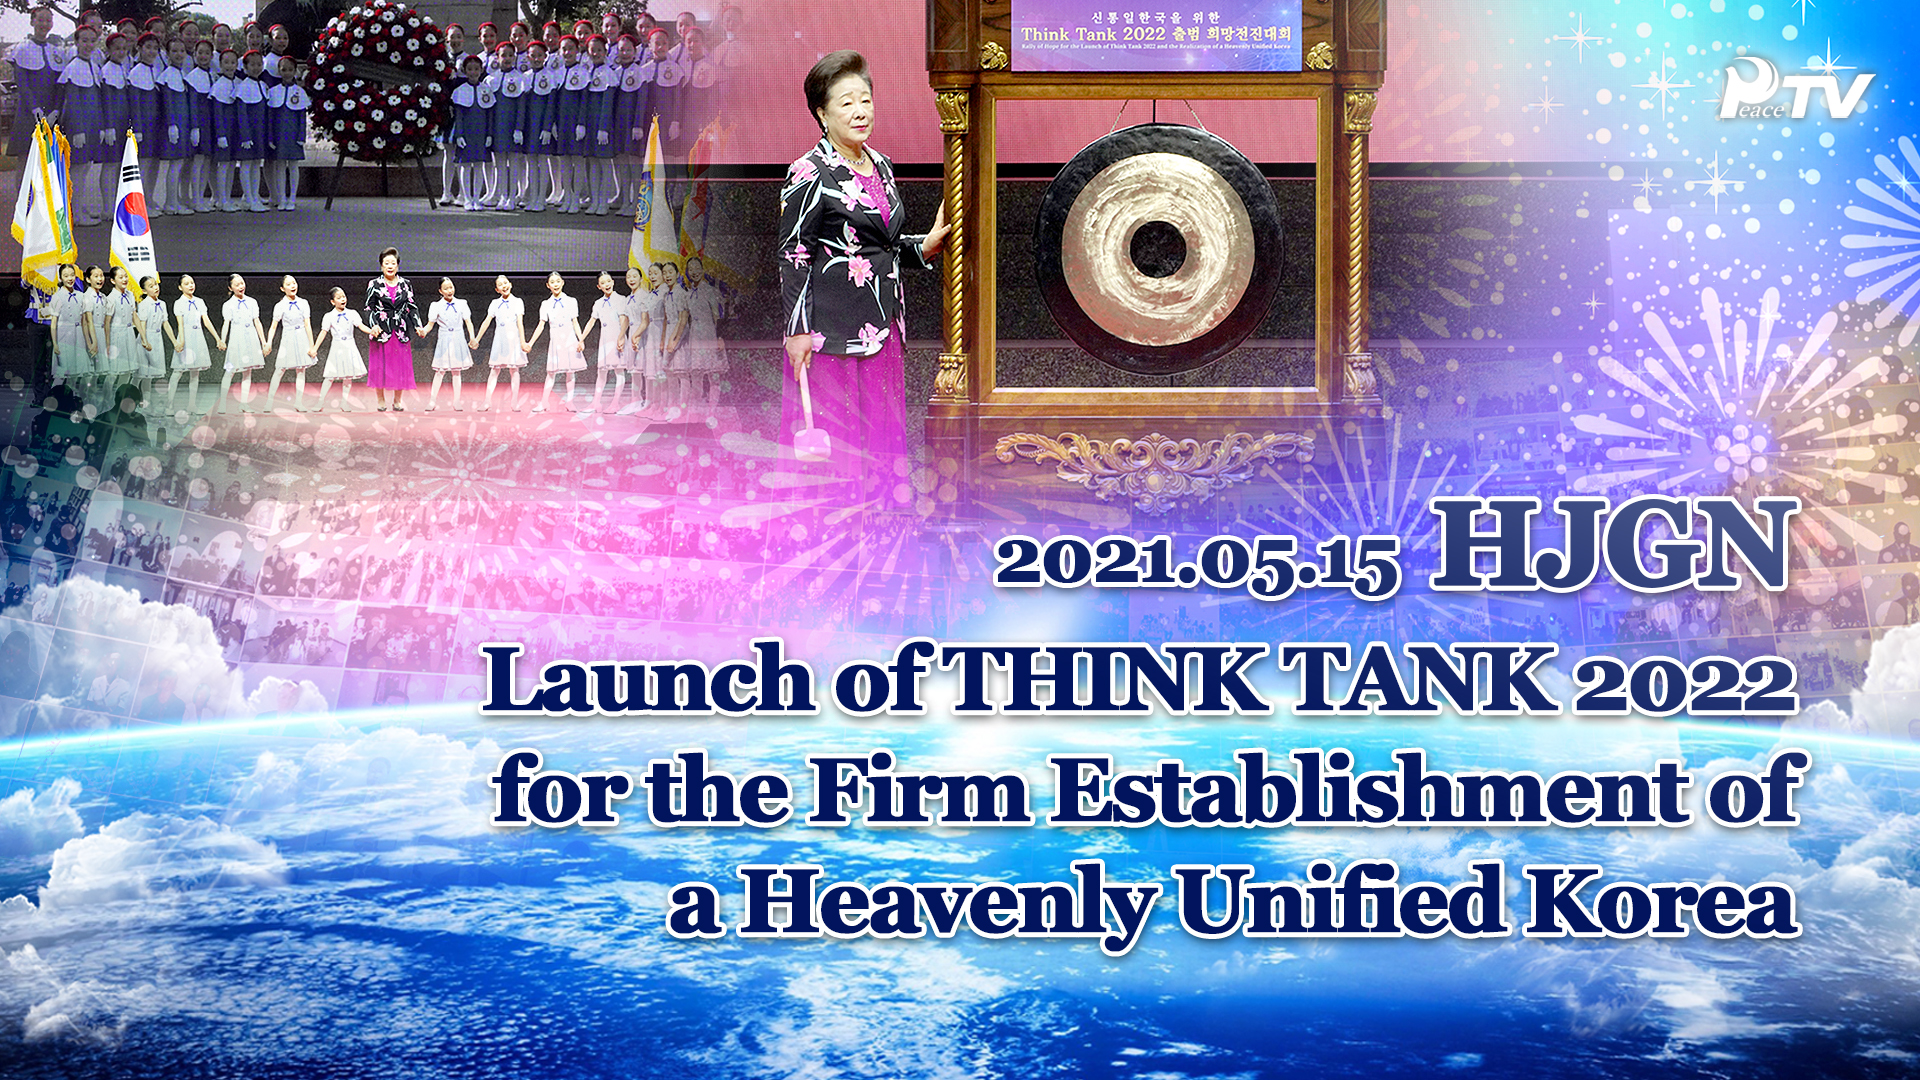 Launch of THINK TANK 2022 for the Firm Establishment of a Heavenly Unified Korea